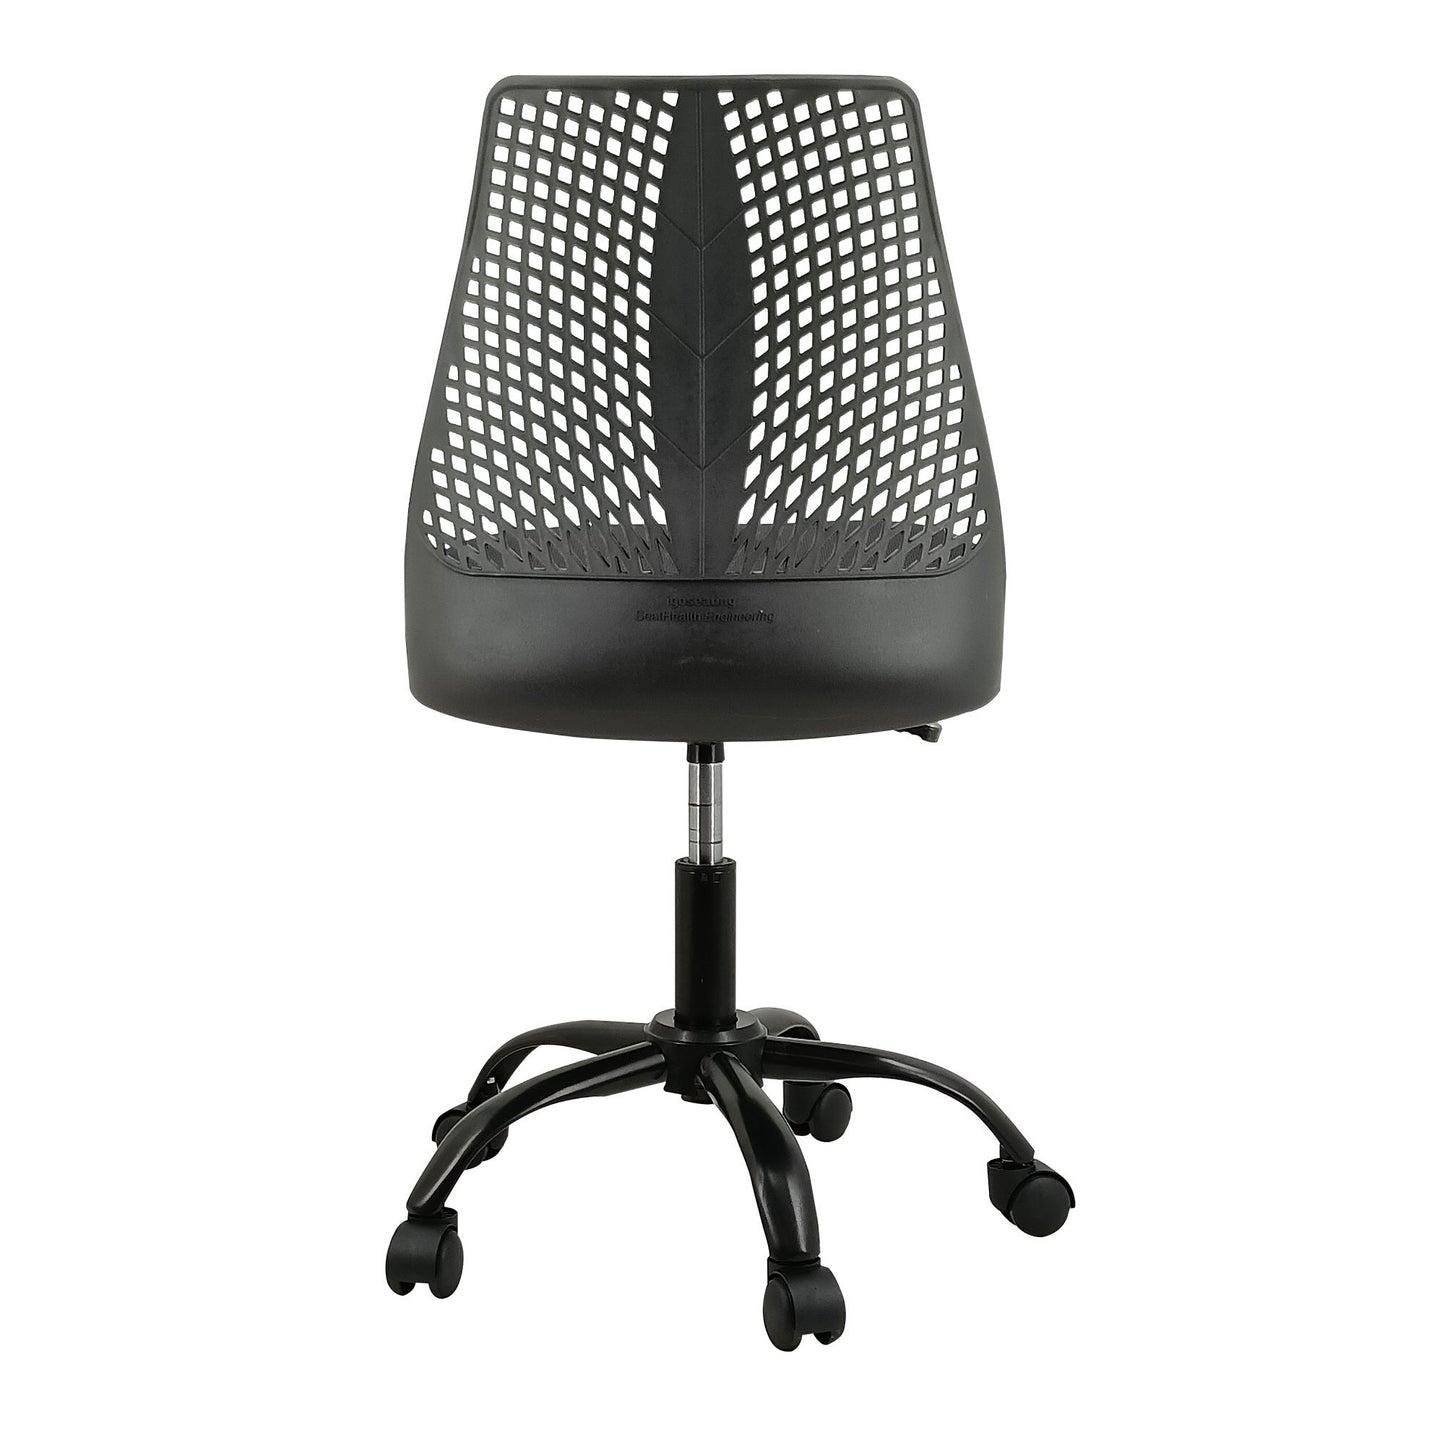 Ergonomic Office and Home Chair with Supportive Cushioning, Grey